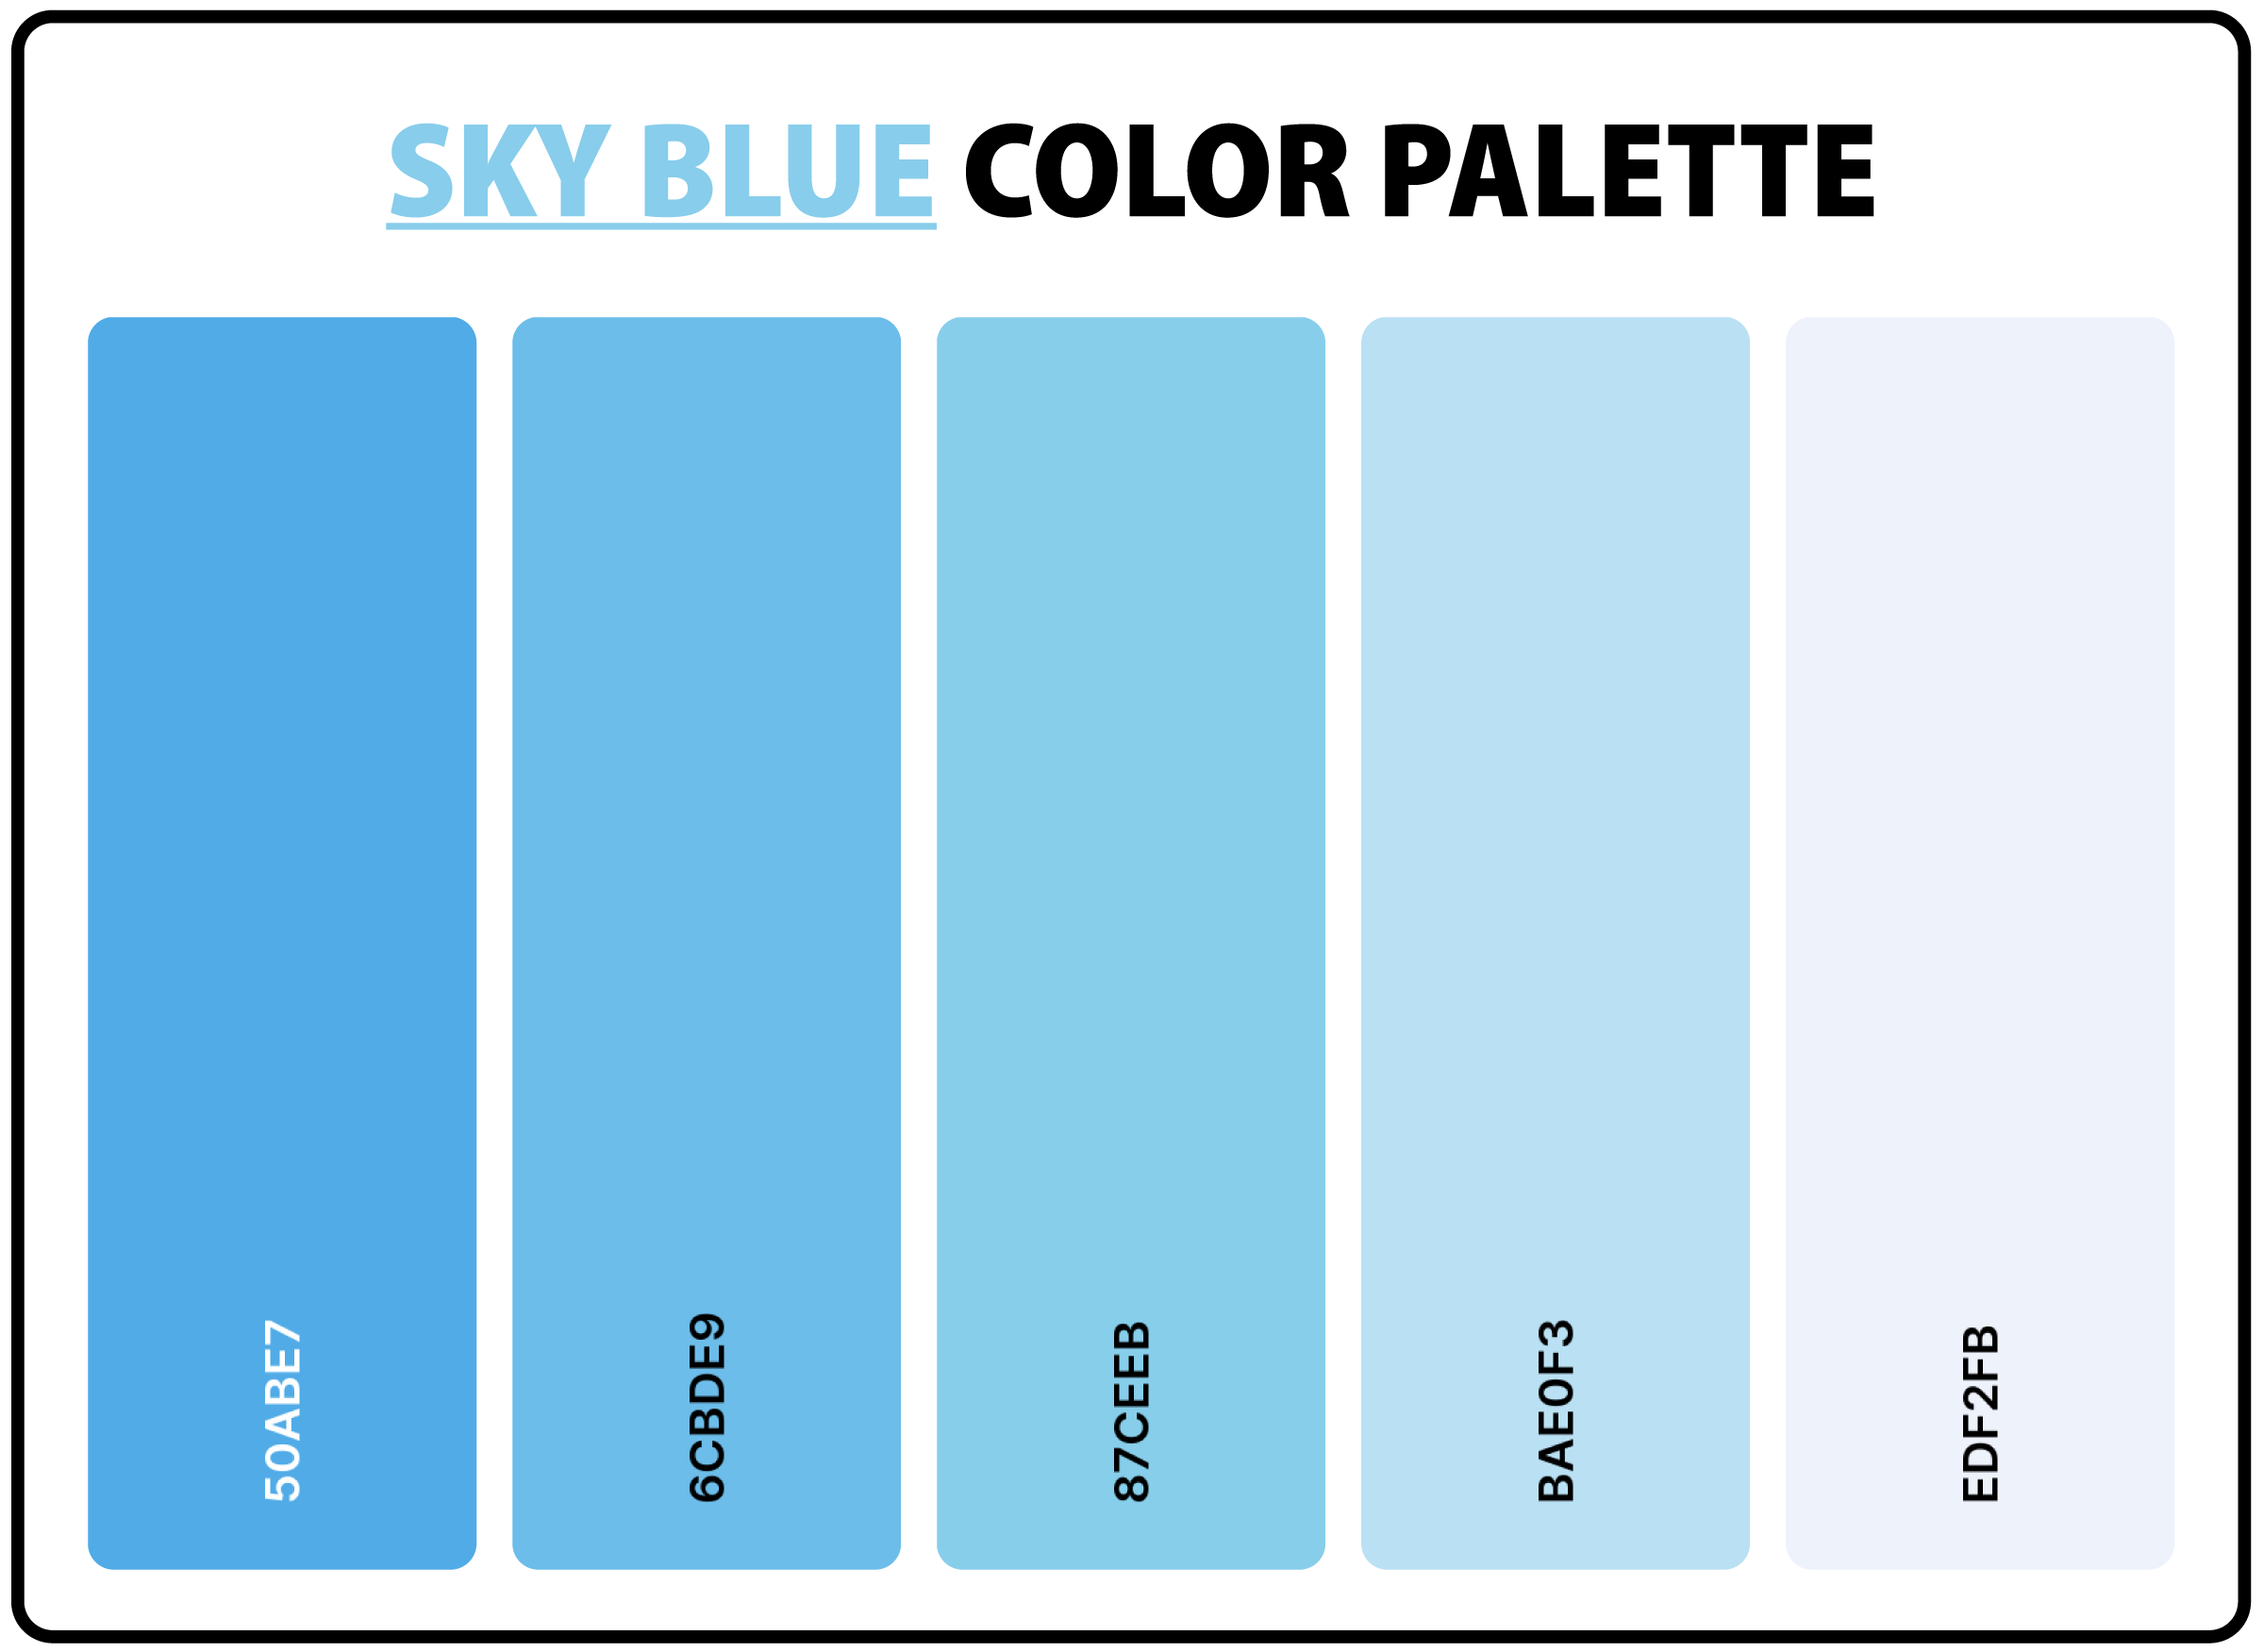 Sky-Blue-Color-Palette-with-Hex-Codes